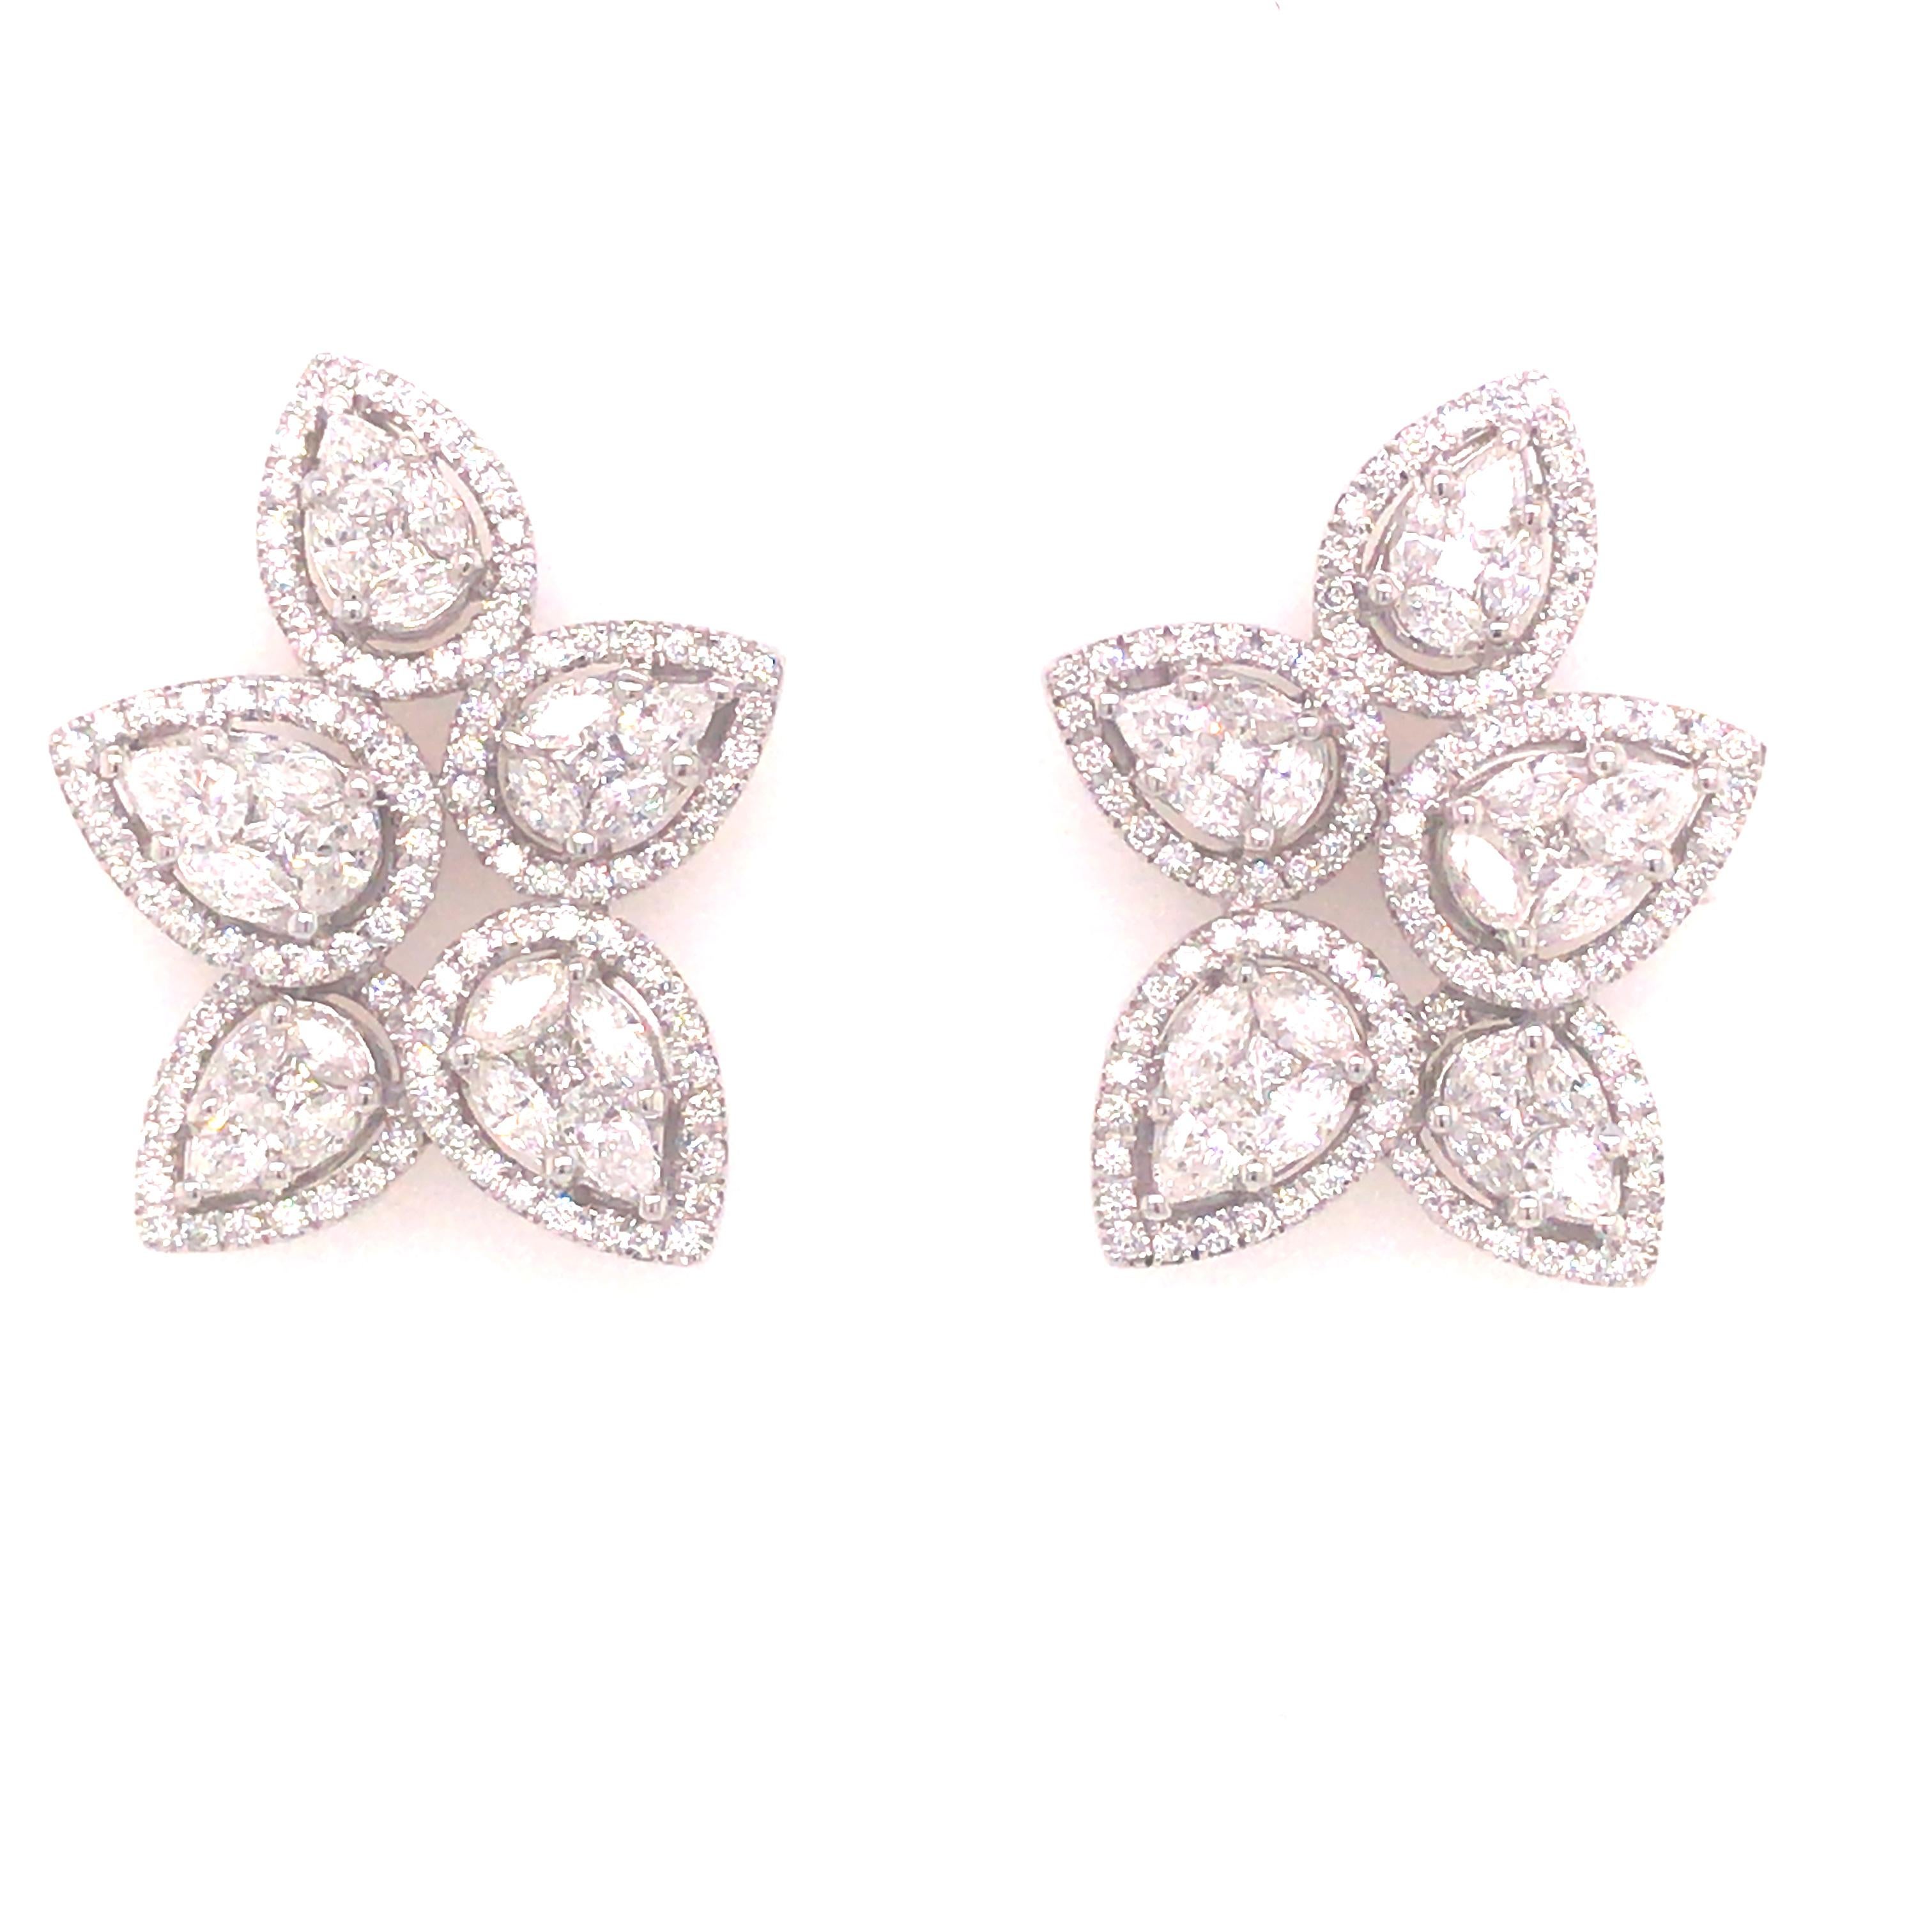 Diamond Cluster Flower Petal Earrings in 18K White Gold. Round Brilliant Cut, Princess Cut and Marquise Diamonds weighing approximately 2.55 carat total weight, G-H in color and VS in clarity are expertly set. The Earrings measure 1 inch in length